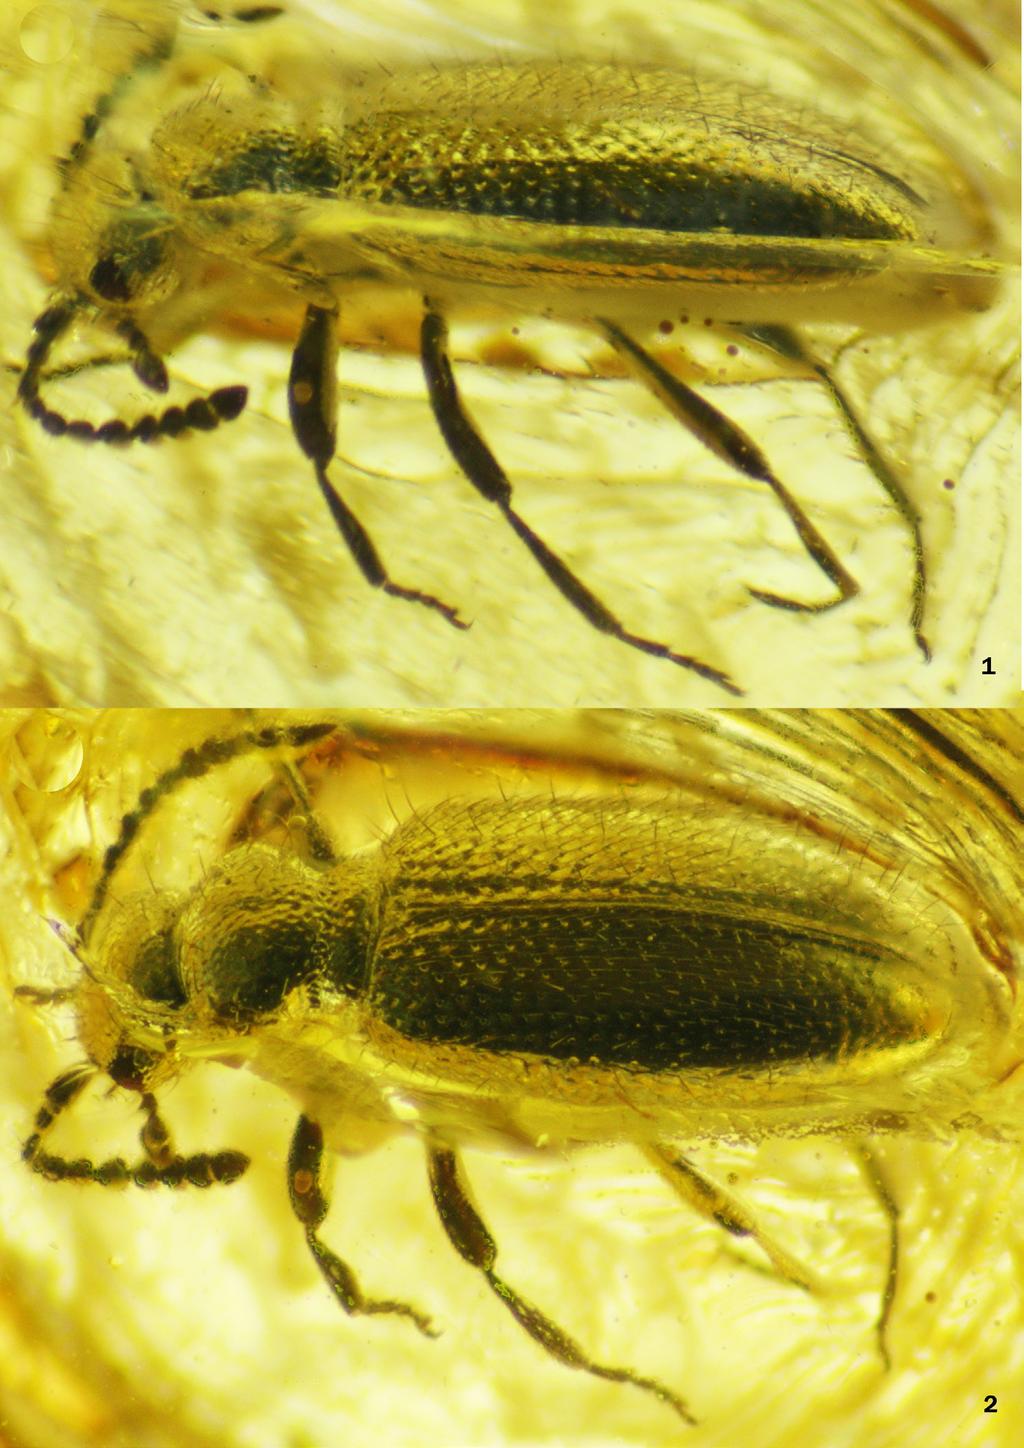 8 Tomoderinae (Coleoptera: Anthicidae) of the Baltic amber Figures 1-2.